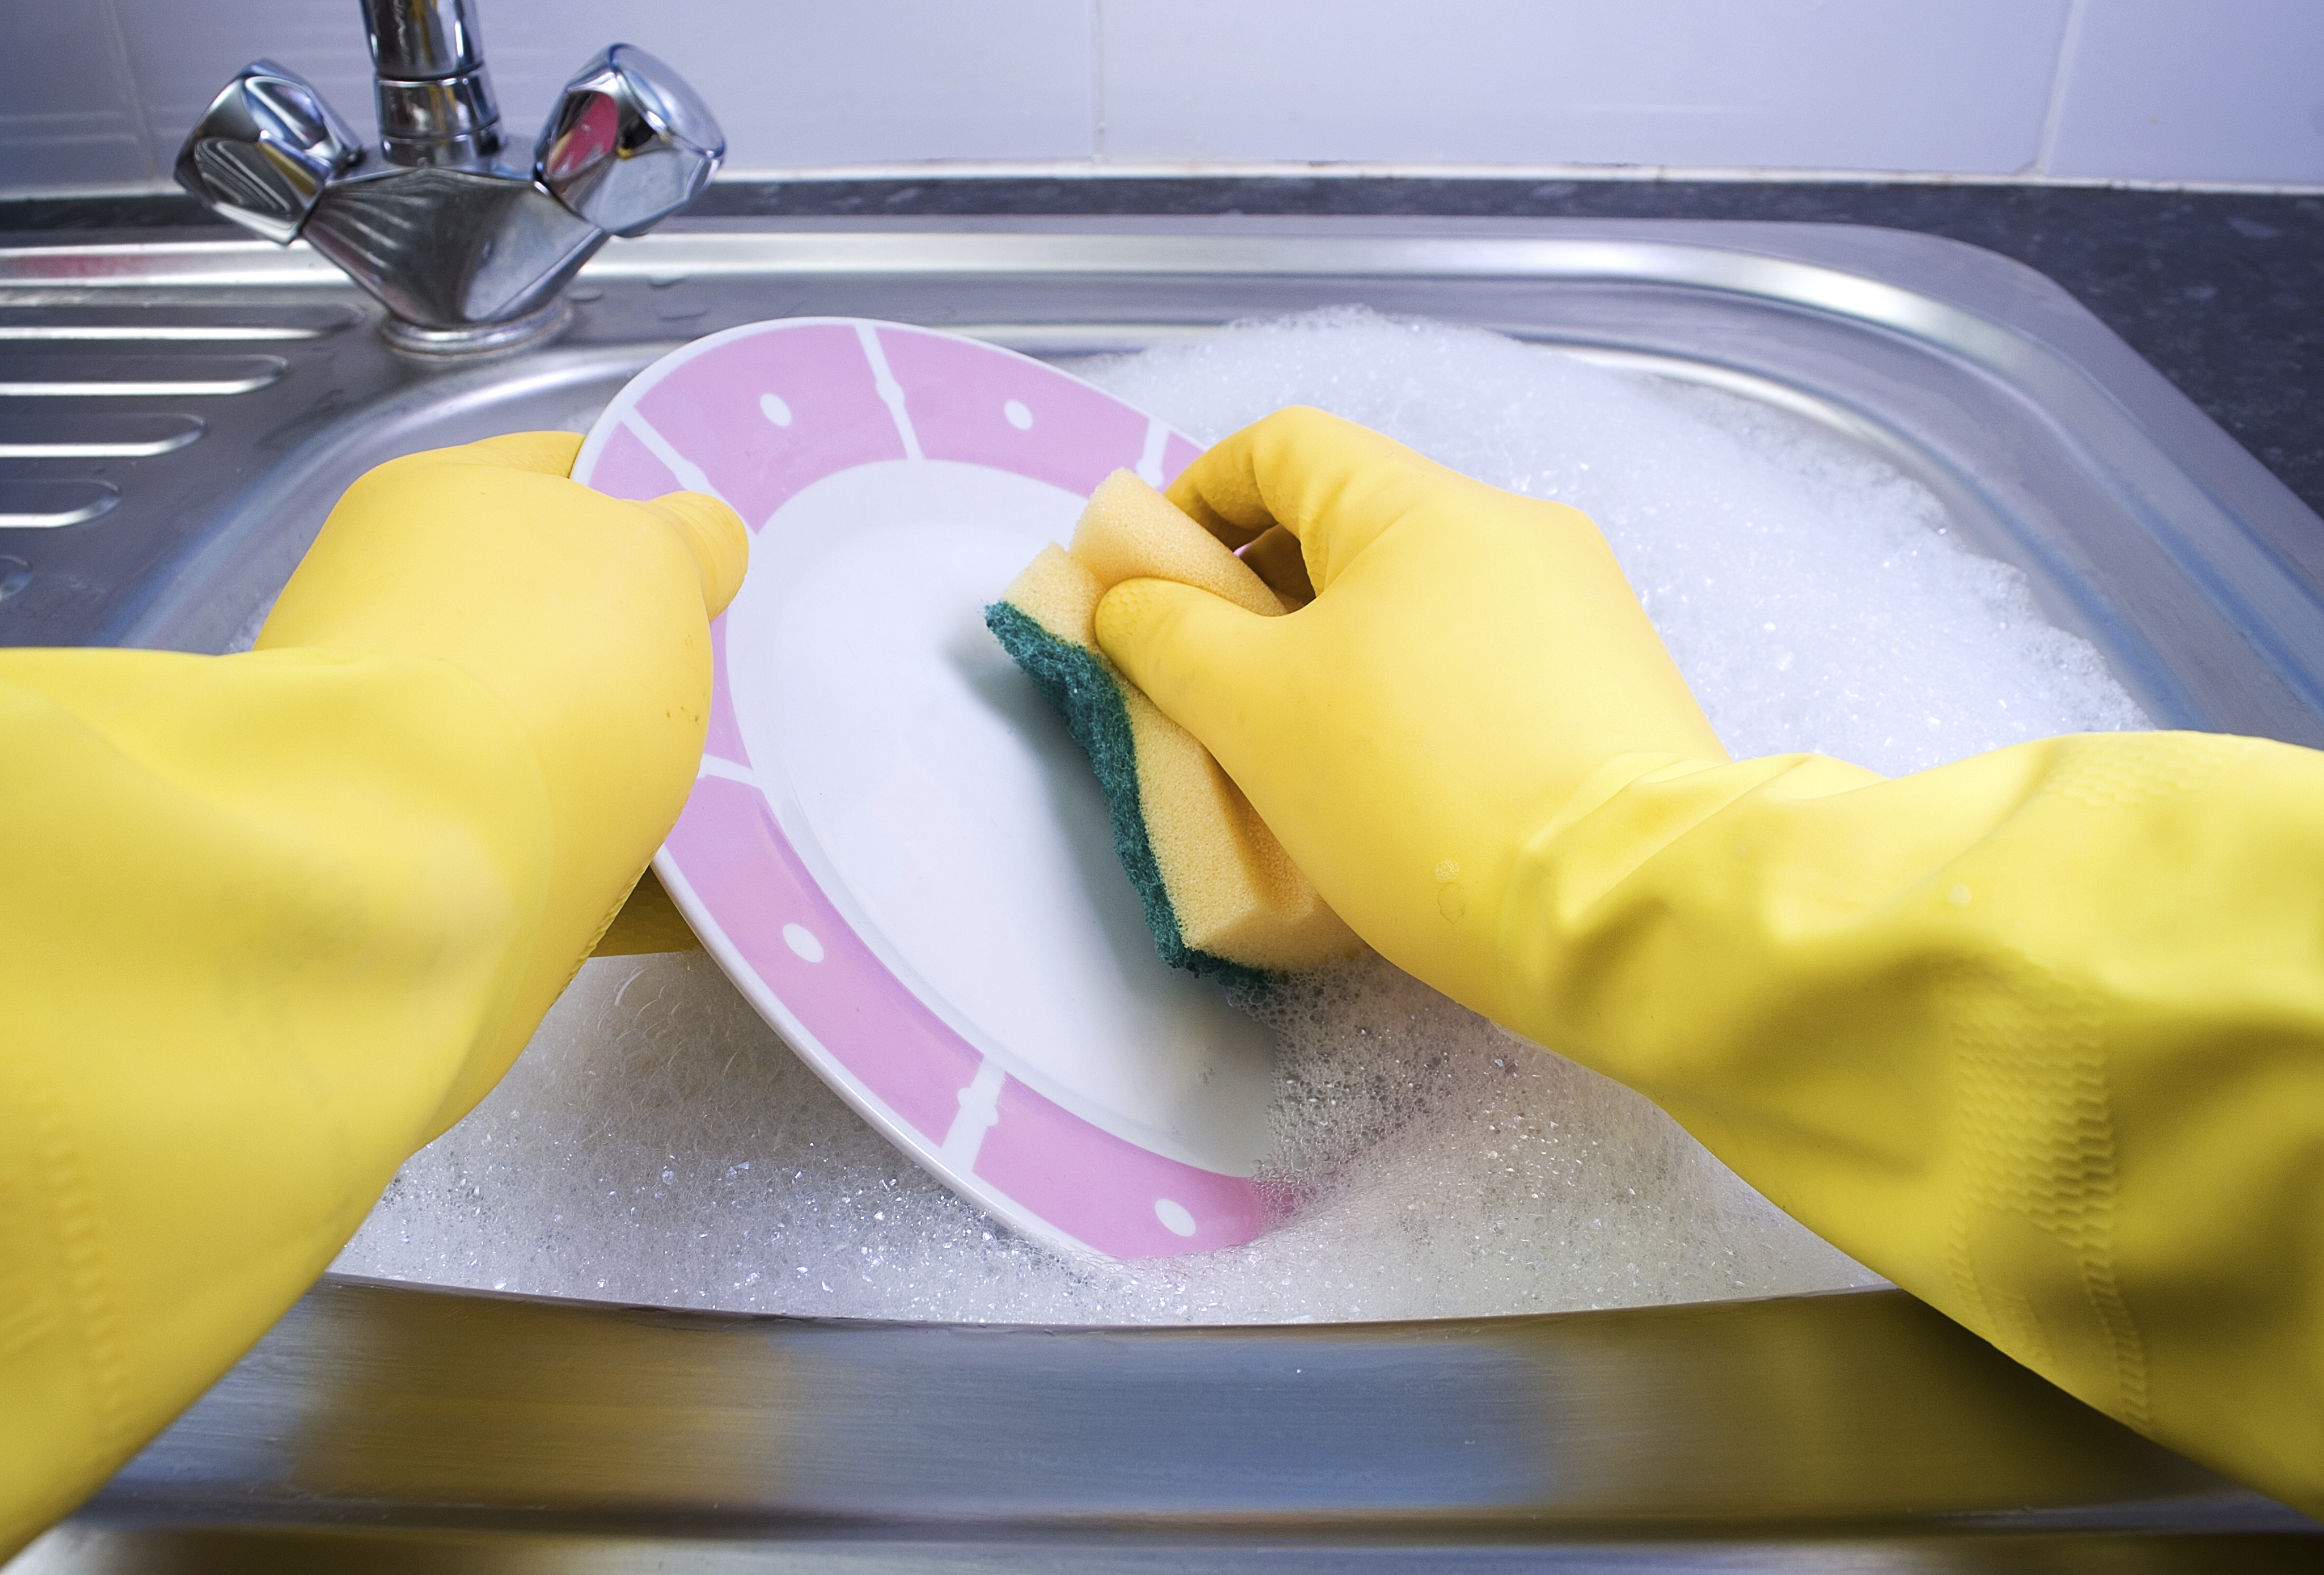 Hand-wash your dishes to help protect kids from allergies - CBS News